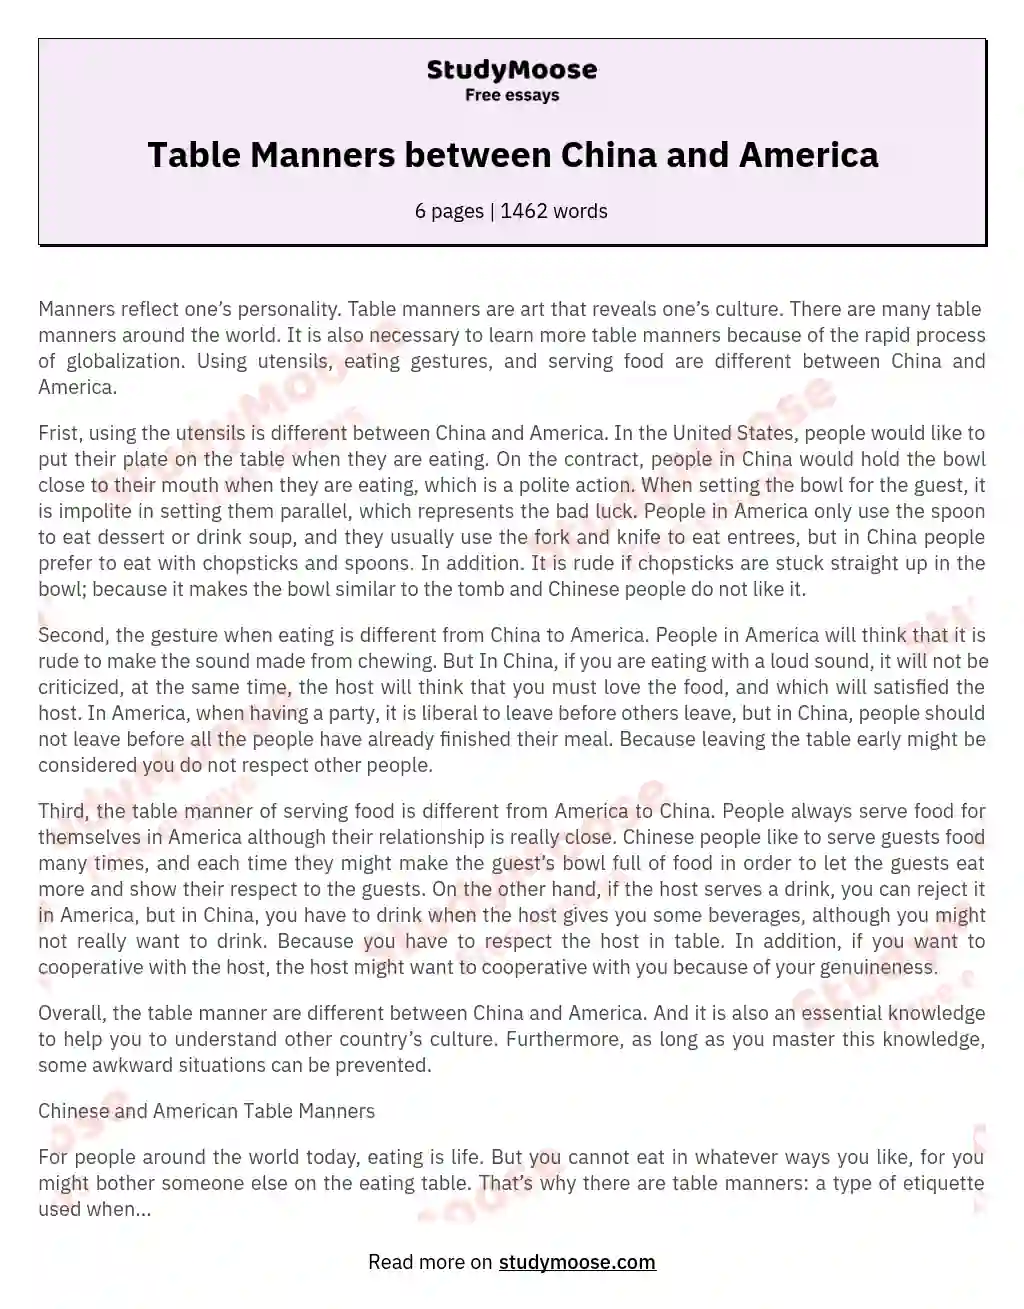 Table Manners between China and America